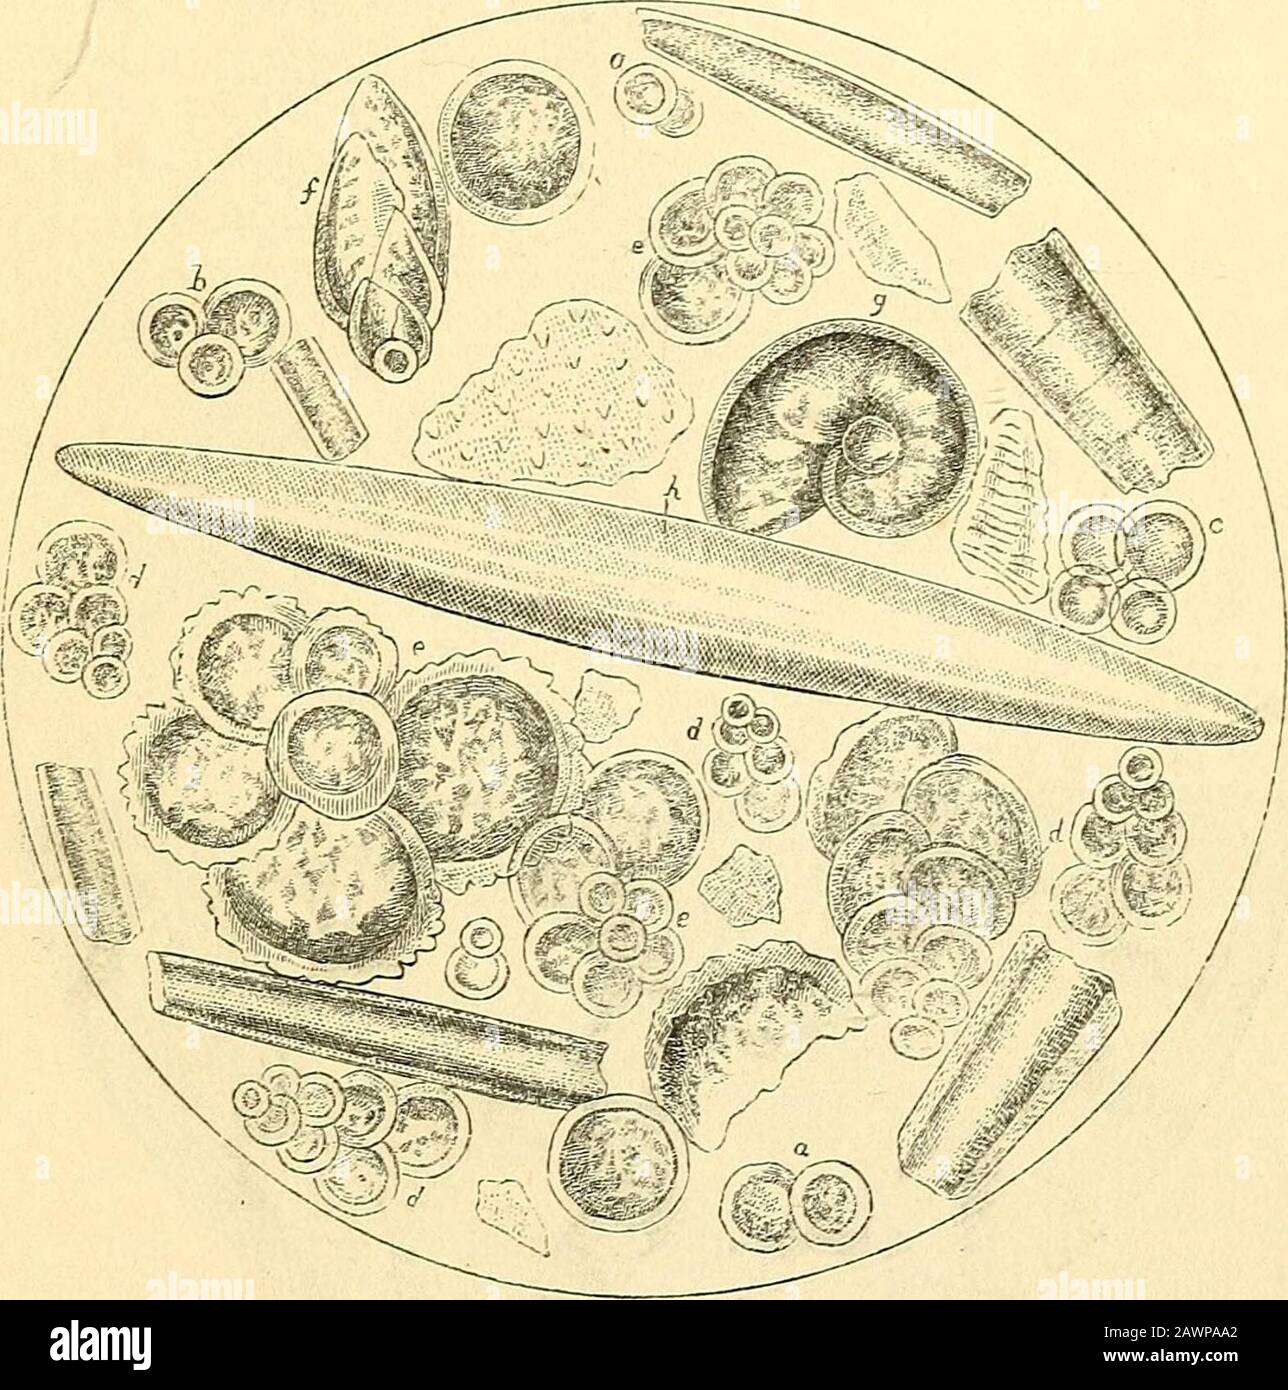 The microscope and its revelations . Microscopic Organisms in Levant Mud:—a, d, siliceous spiculesoiTethi/a; B, H, spicules of Geodia; c, Sponge-spicule (unknown); e,calcareous spicule of Ghantia; f, g, m, o, portions of calcareous skele-ton of Ecliinodermata; H, I, calcareous spicule of Gorgonia; k, l, n,siliceous spicules of Halichondria ; p, portion of prismatic layer ofshell of Pinna. COMPOSITION OF MARINE DEPOSITS. 745 tinually undergoing a slow but steady increase in thickness,tlie microscopic researches of Prof. Williamson* have shownthat not only are there multitudes of minute remains Stock Photo